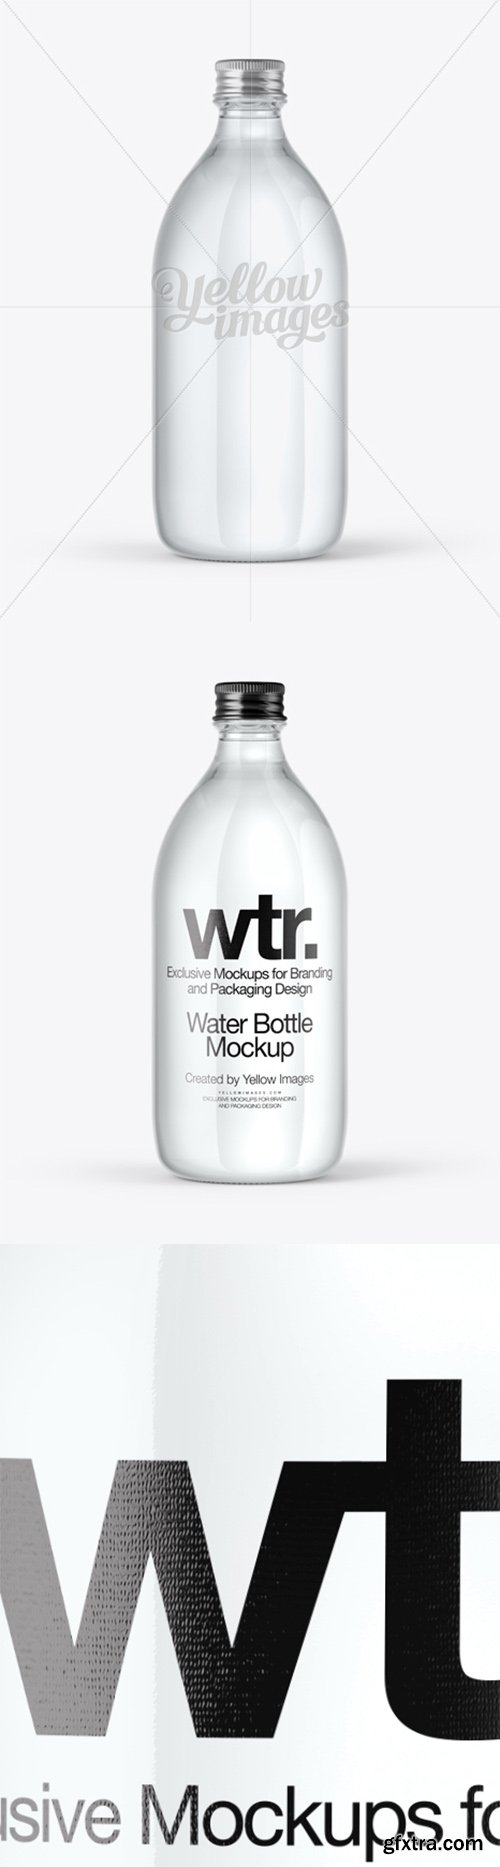 Download Clear Glass Water Bottle Mockup 14371 Gfxtra PSD Mockup Templates